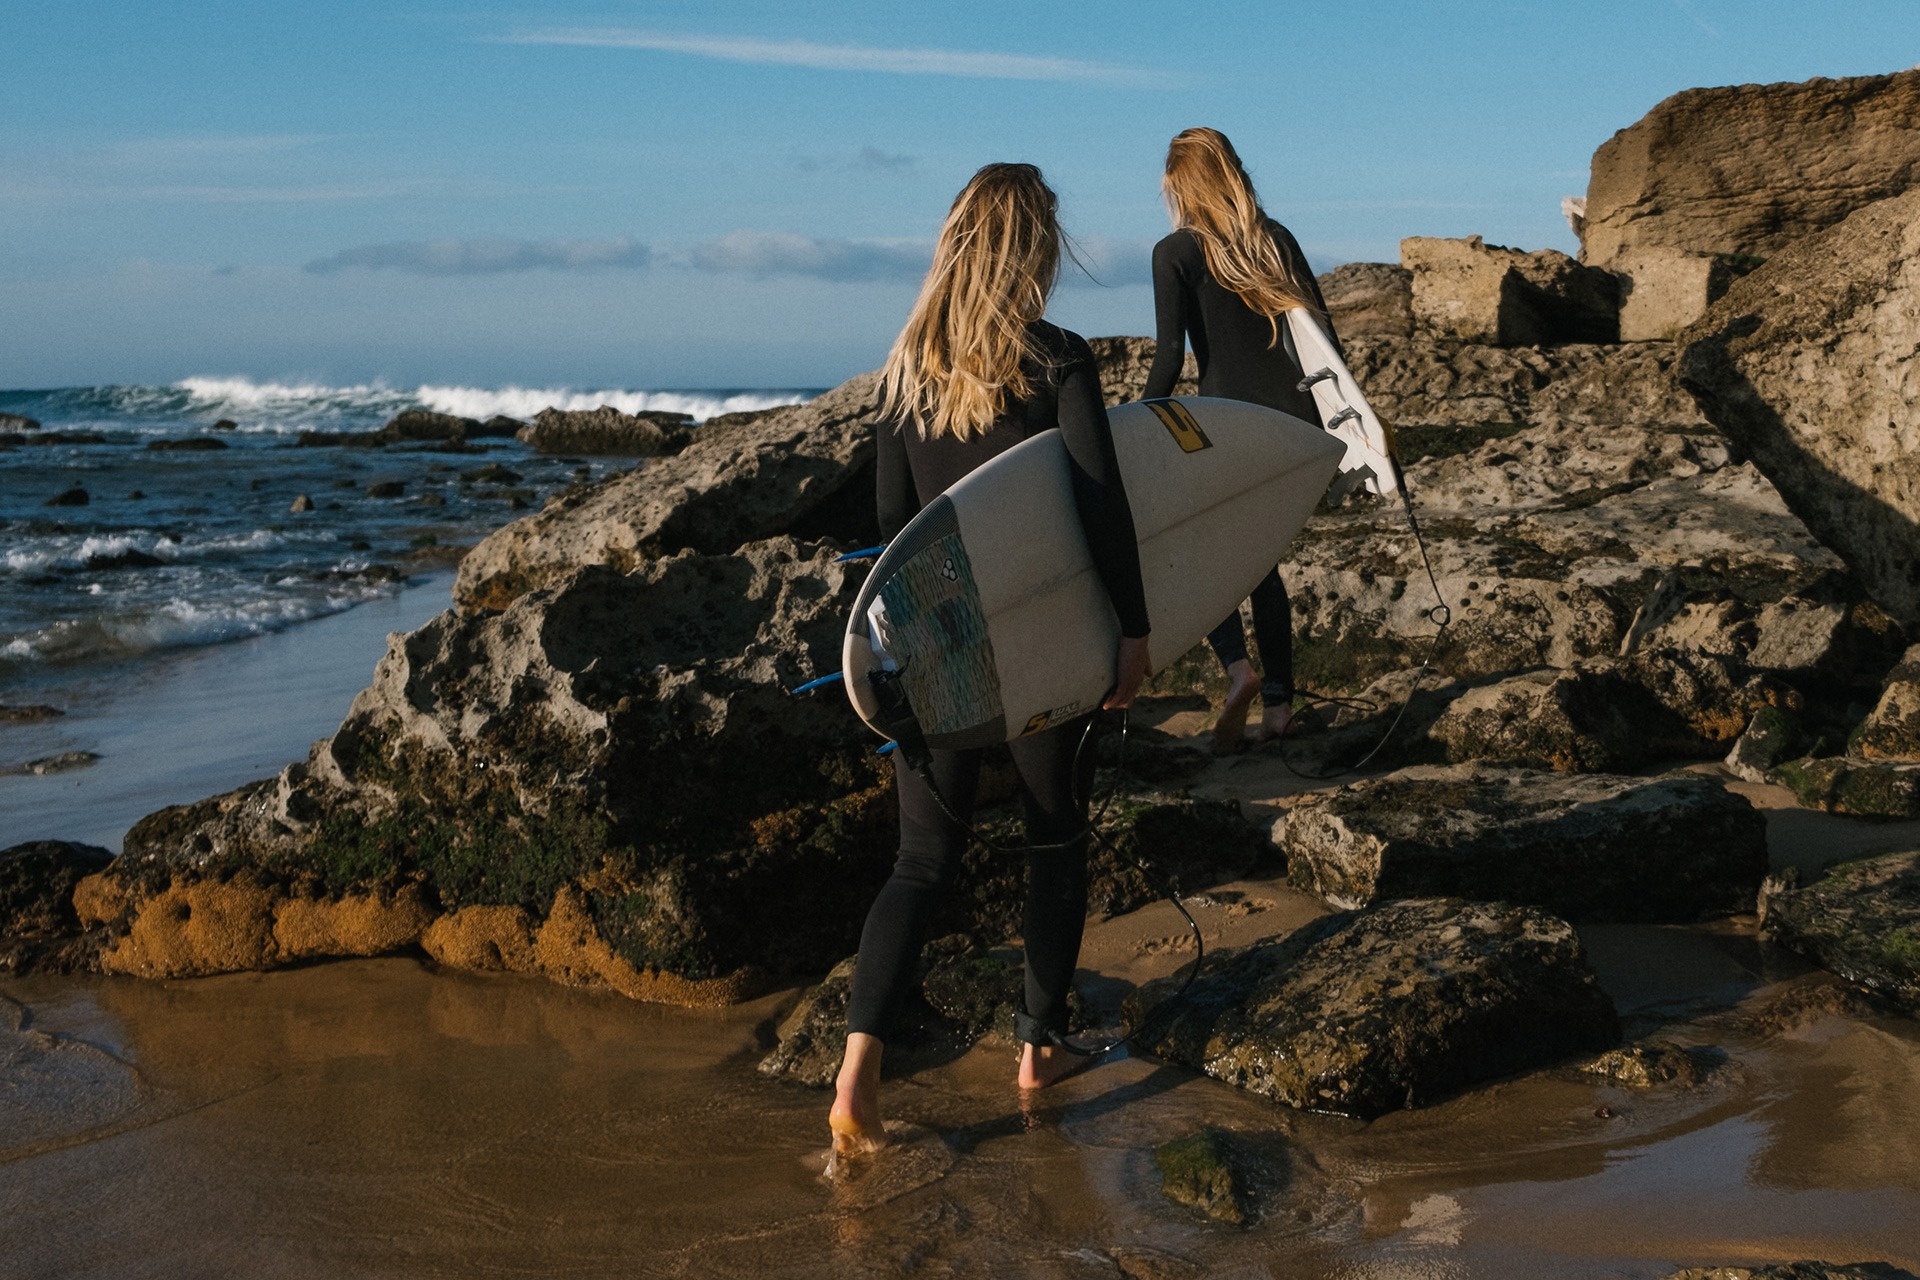 yamamoto neoprene surf wetsuits are the top choice for surfers is because of their superior flexibility.